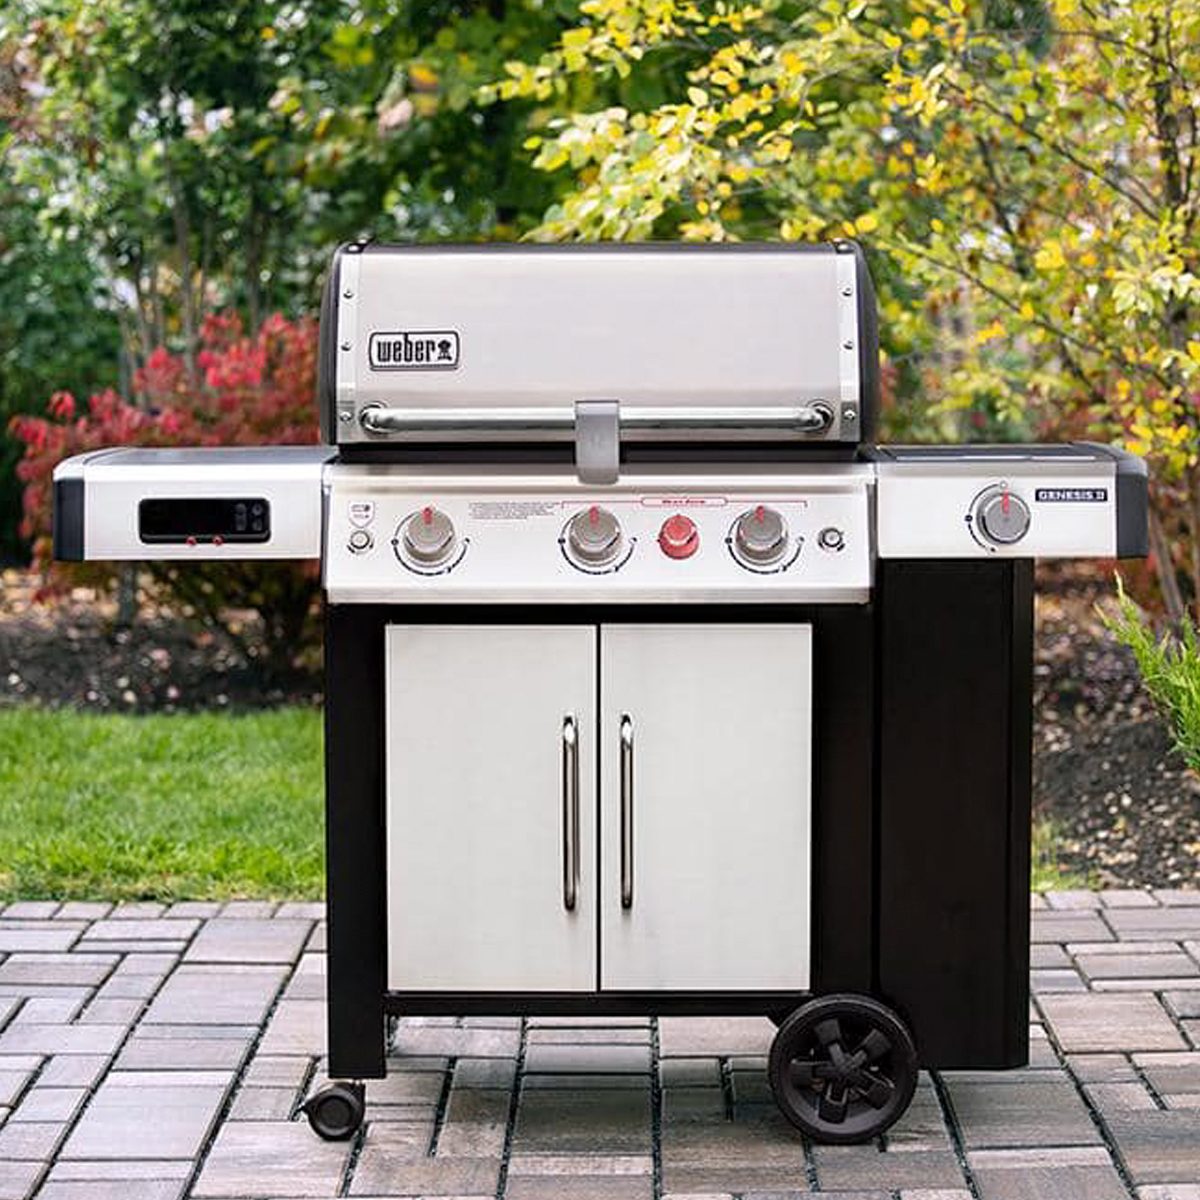 What is a Smart Grill?